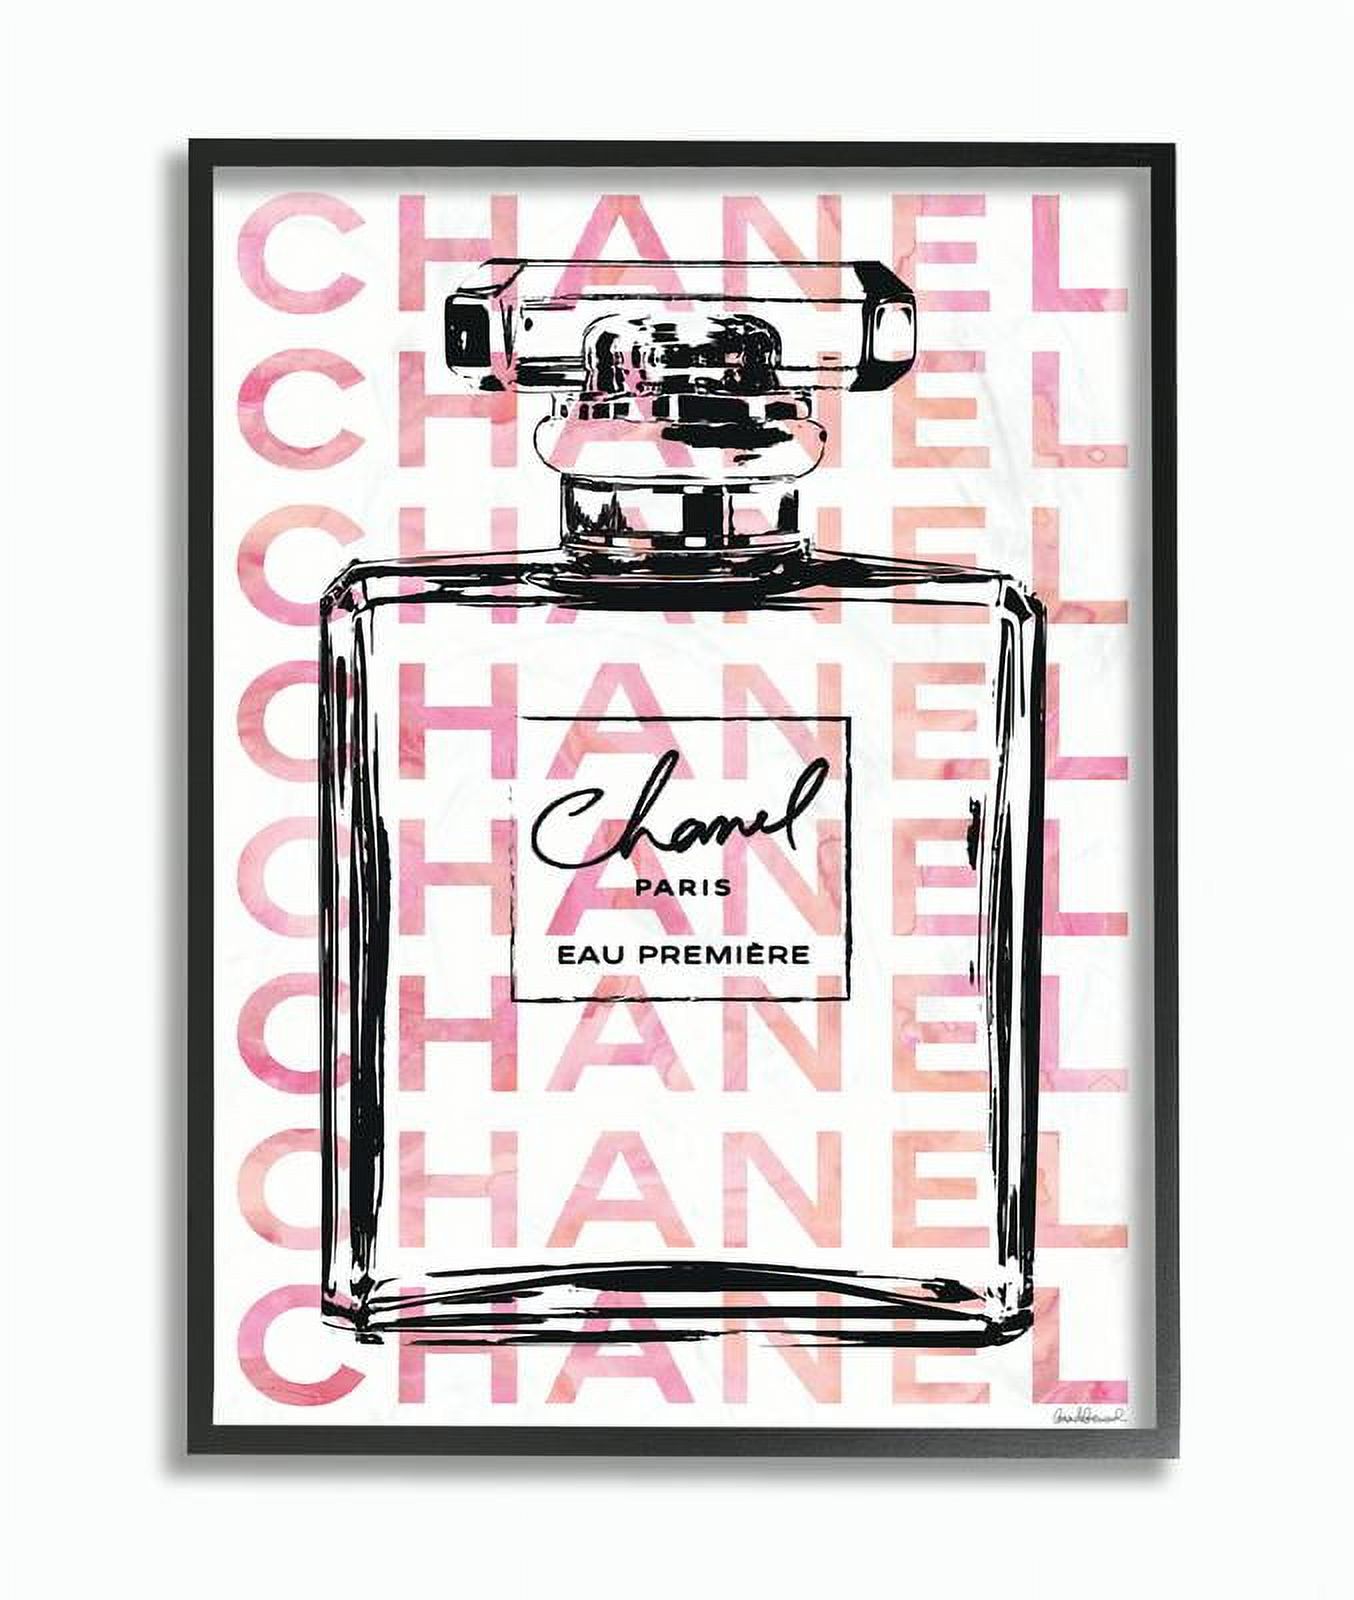 Stupell Industries Glam Perfume Bottle With Words Pink Black Framed Wall Art by Amanda Greenwood - image 1 of 6